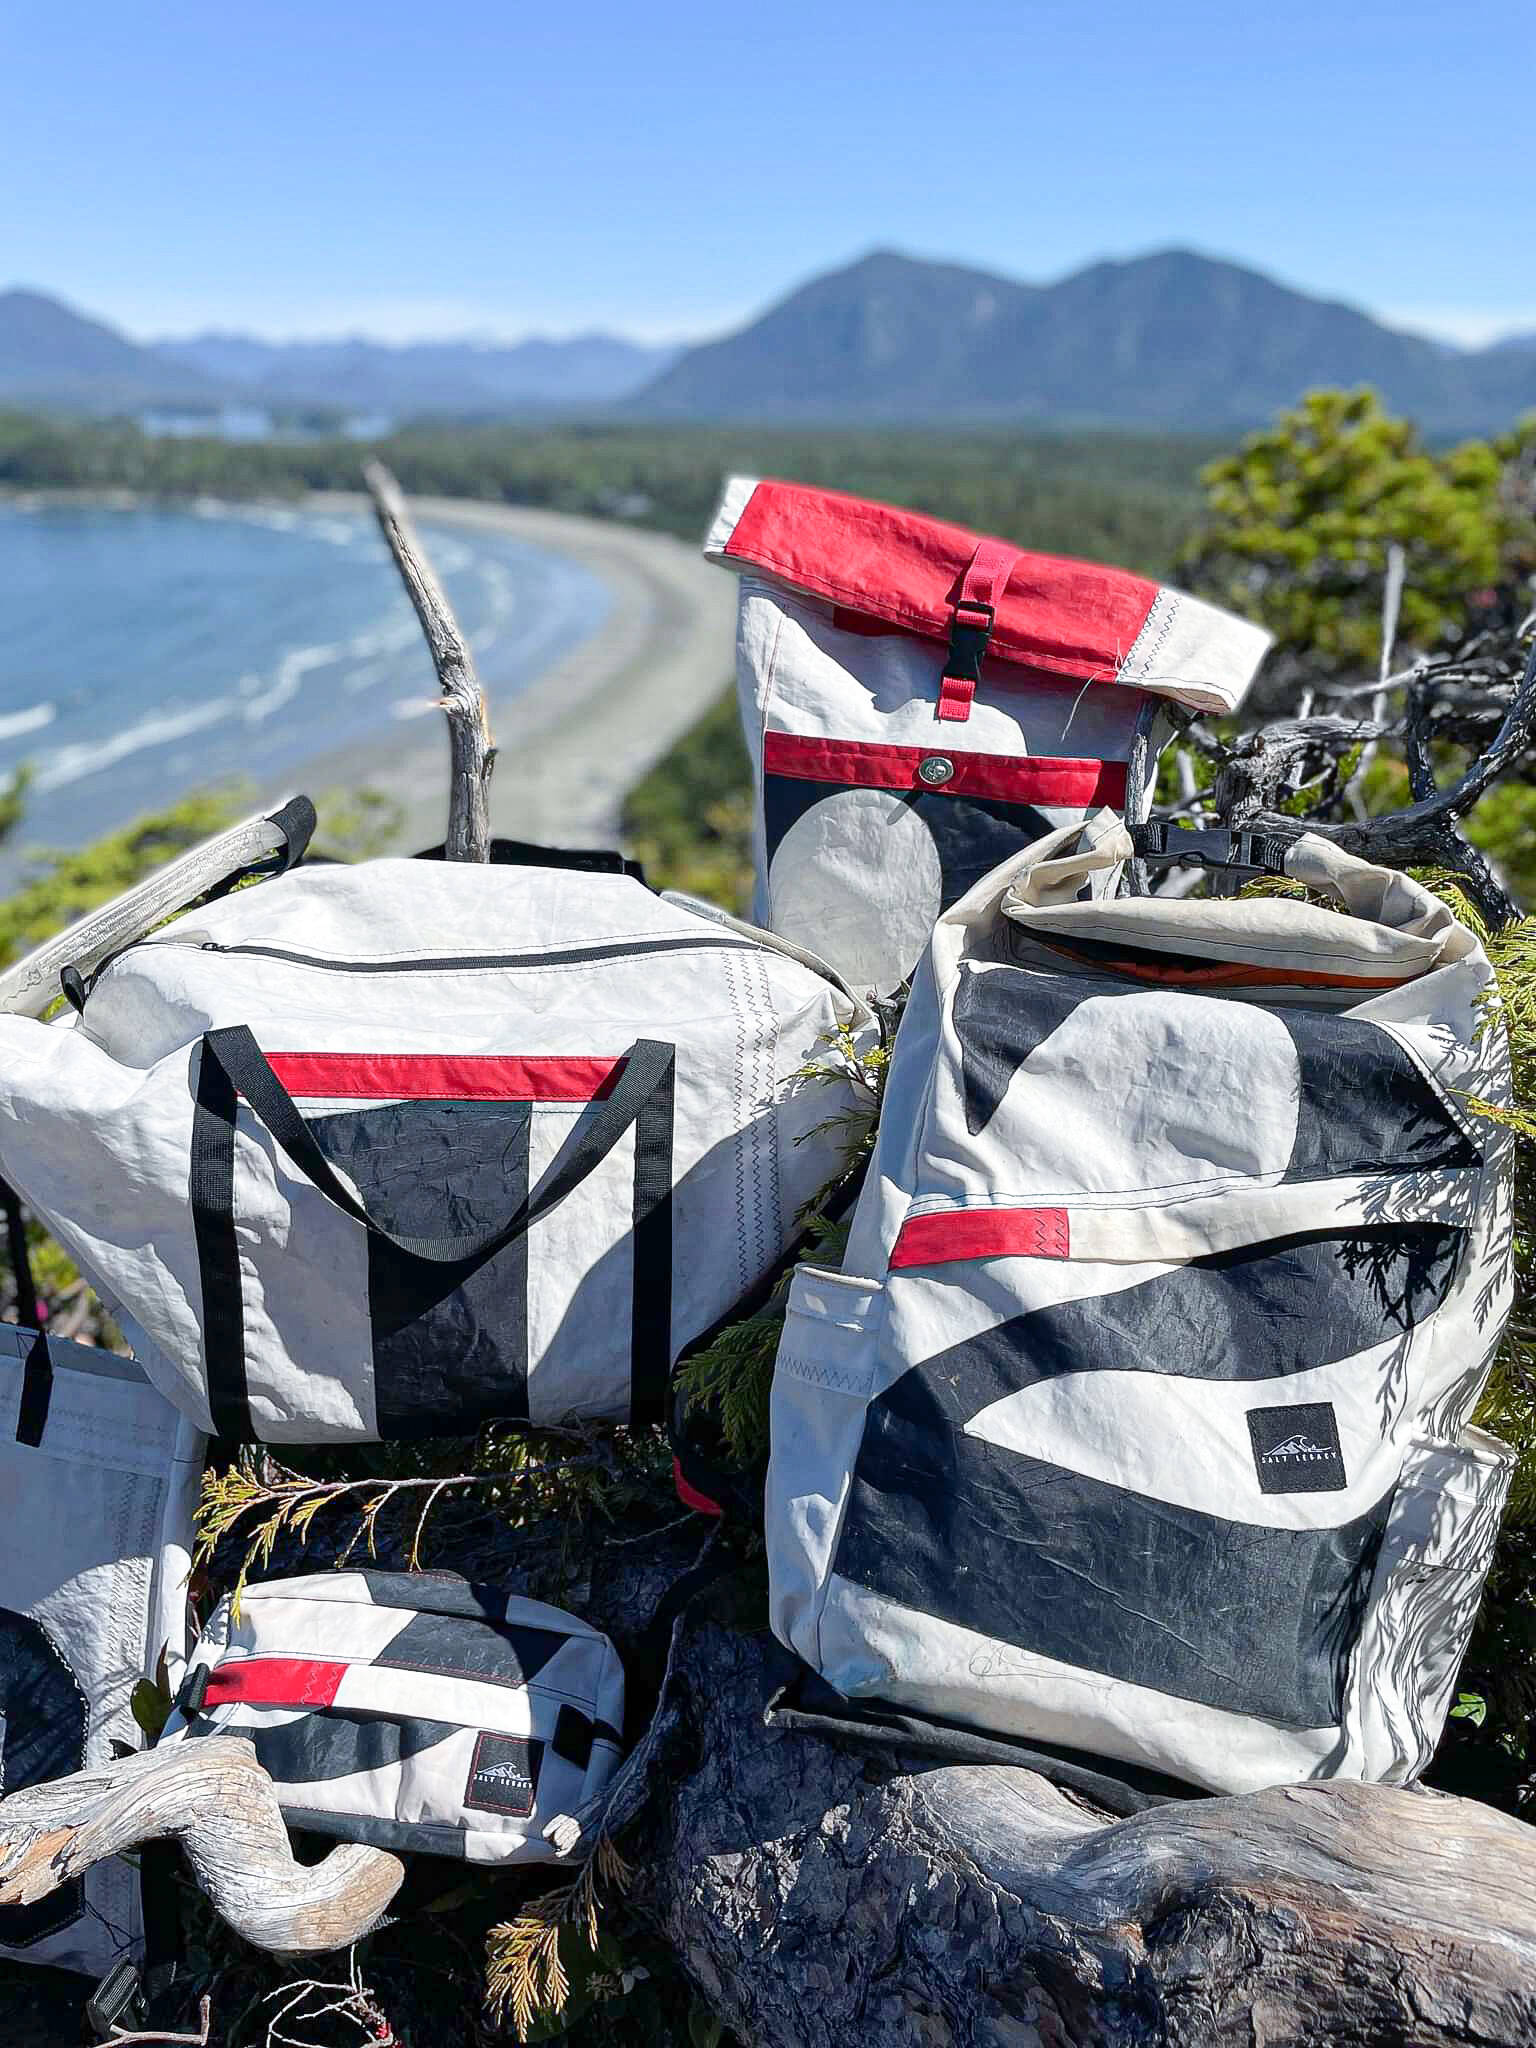 Salt Legacy's bags made from sailcloth. (Courtesy of Salt Legacy)